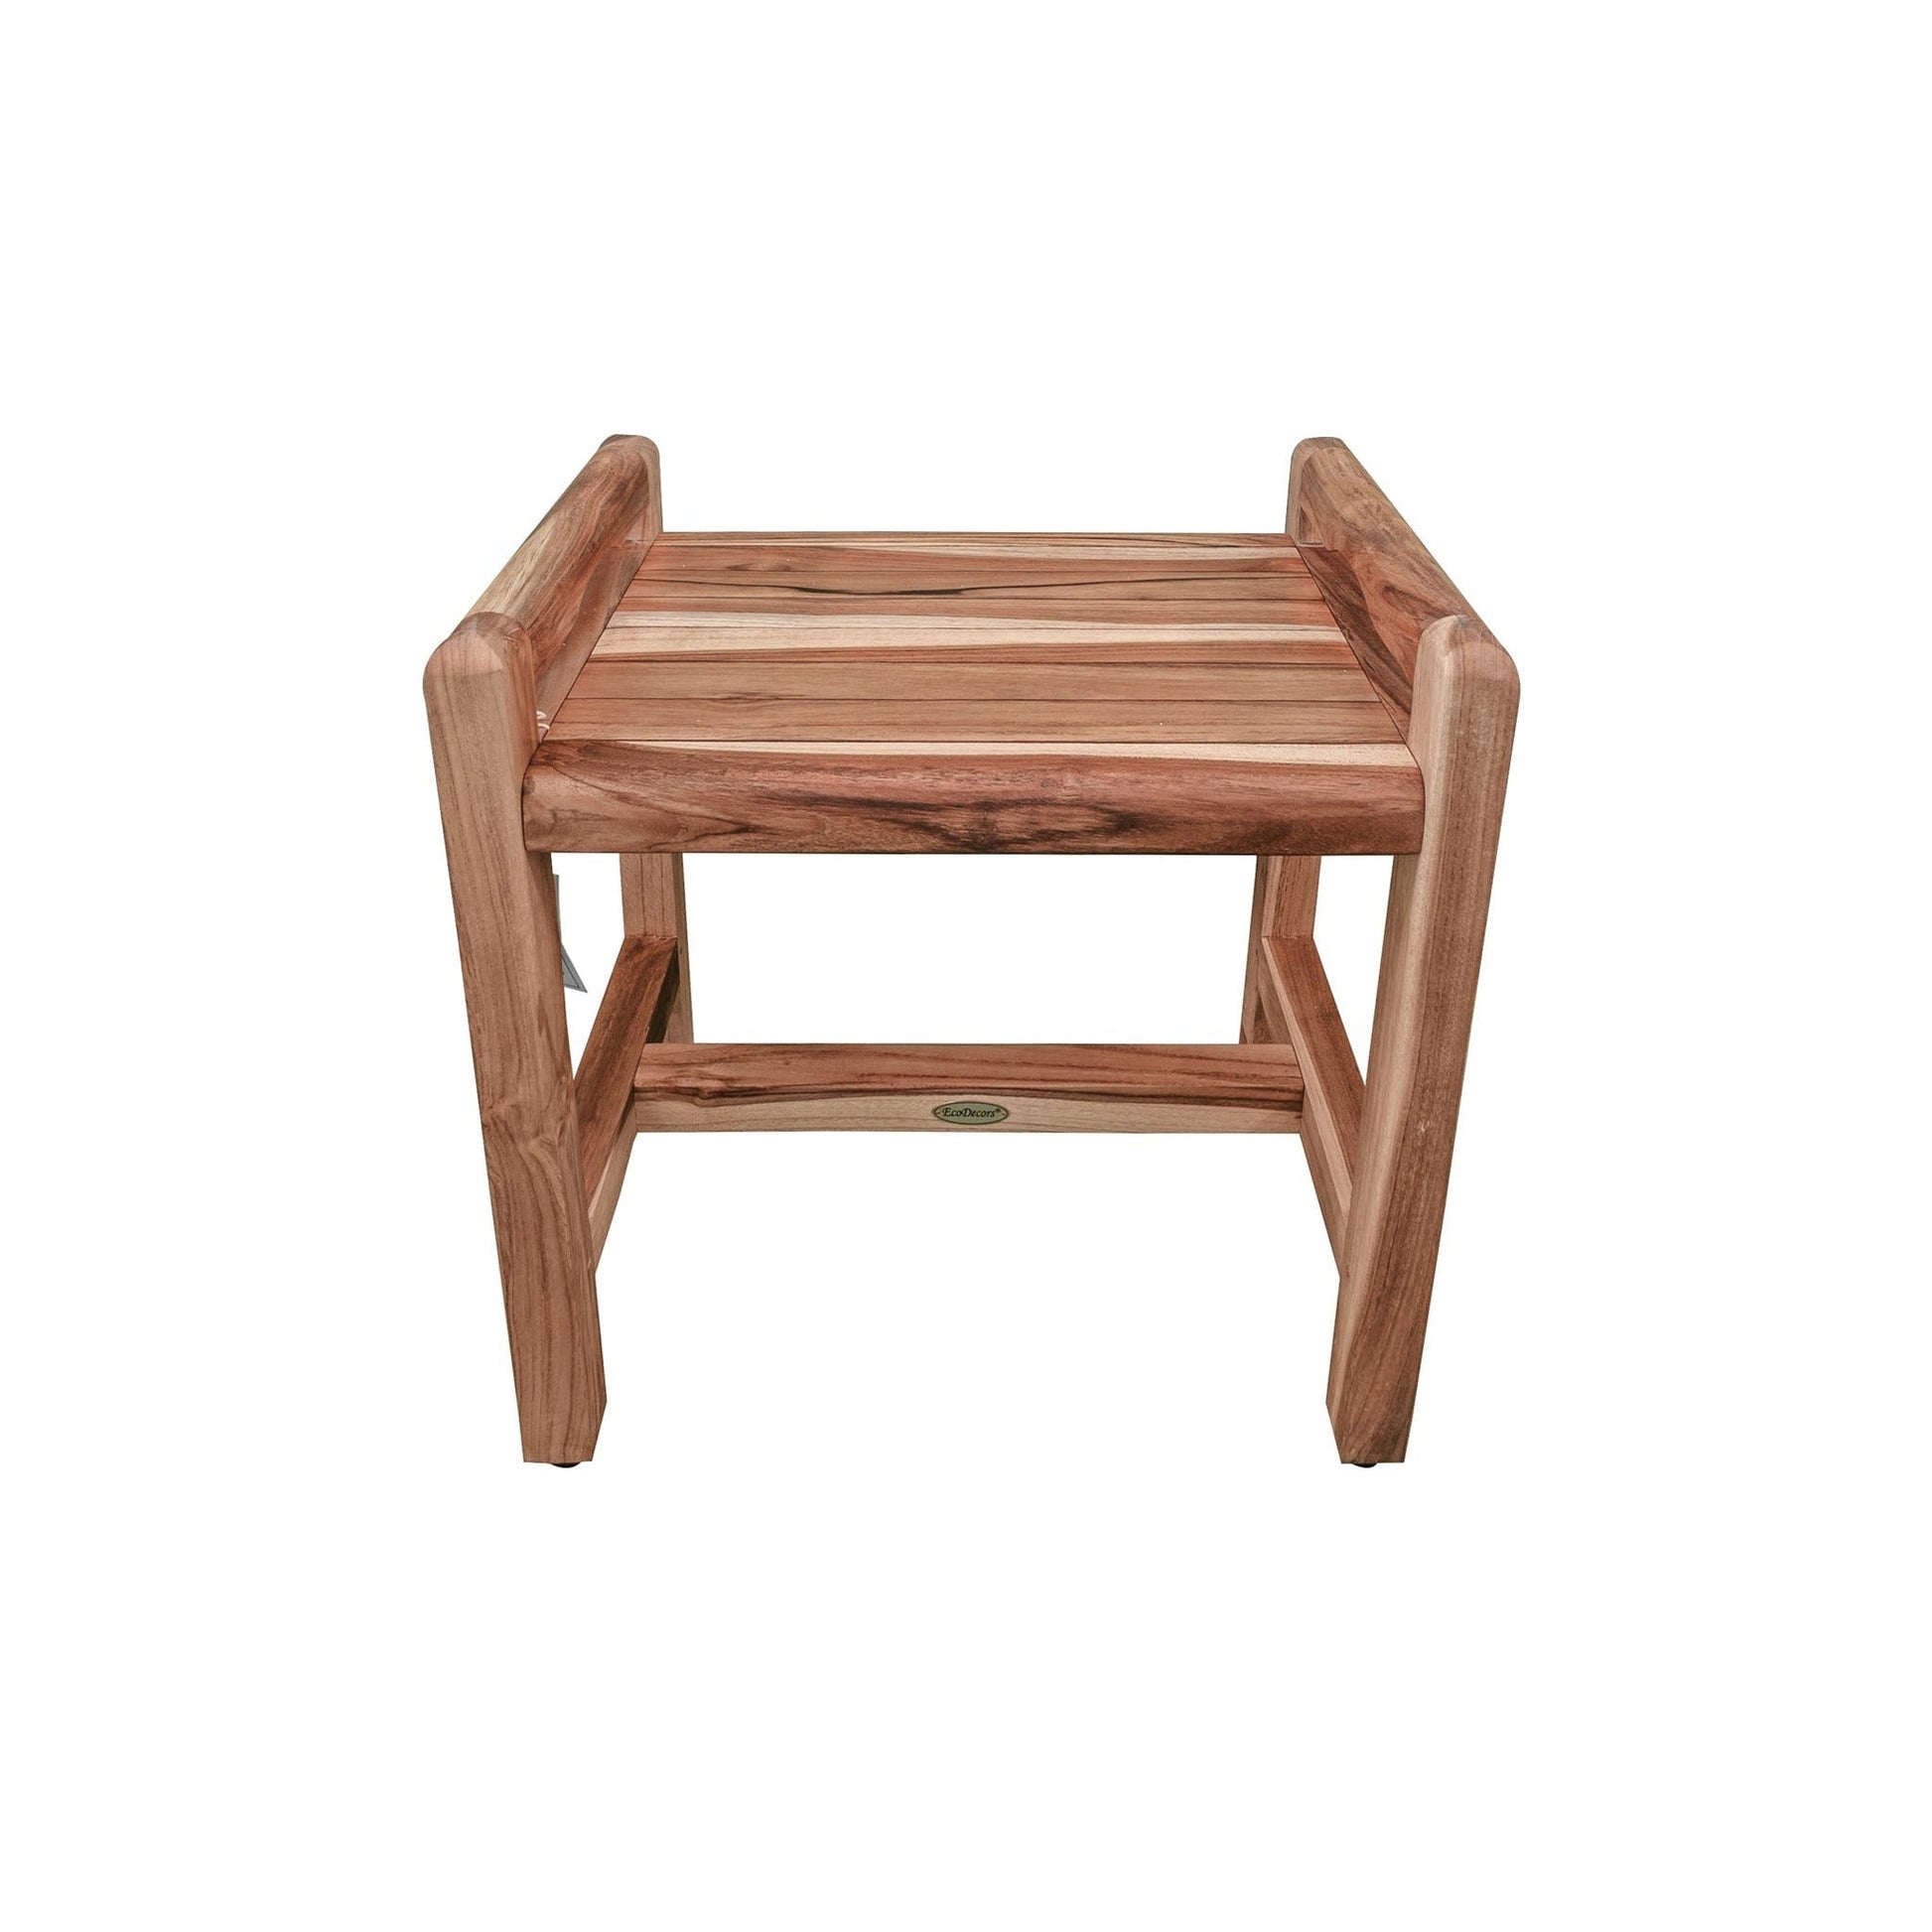 EcoDecors Eleganto 20" EarthyTeak Solid Teak Wood Shower Bench With LiftAide Arms